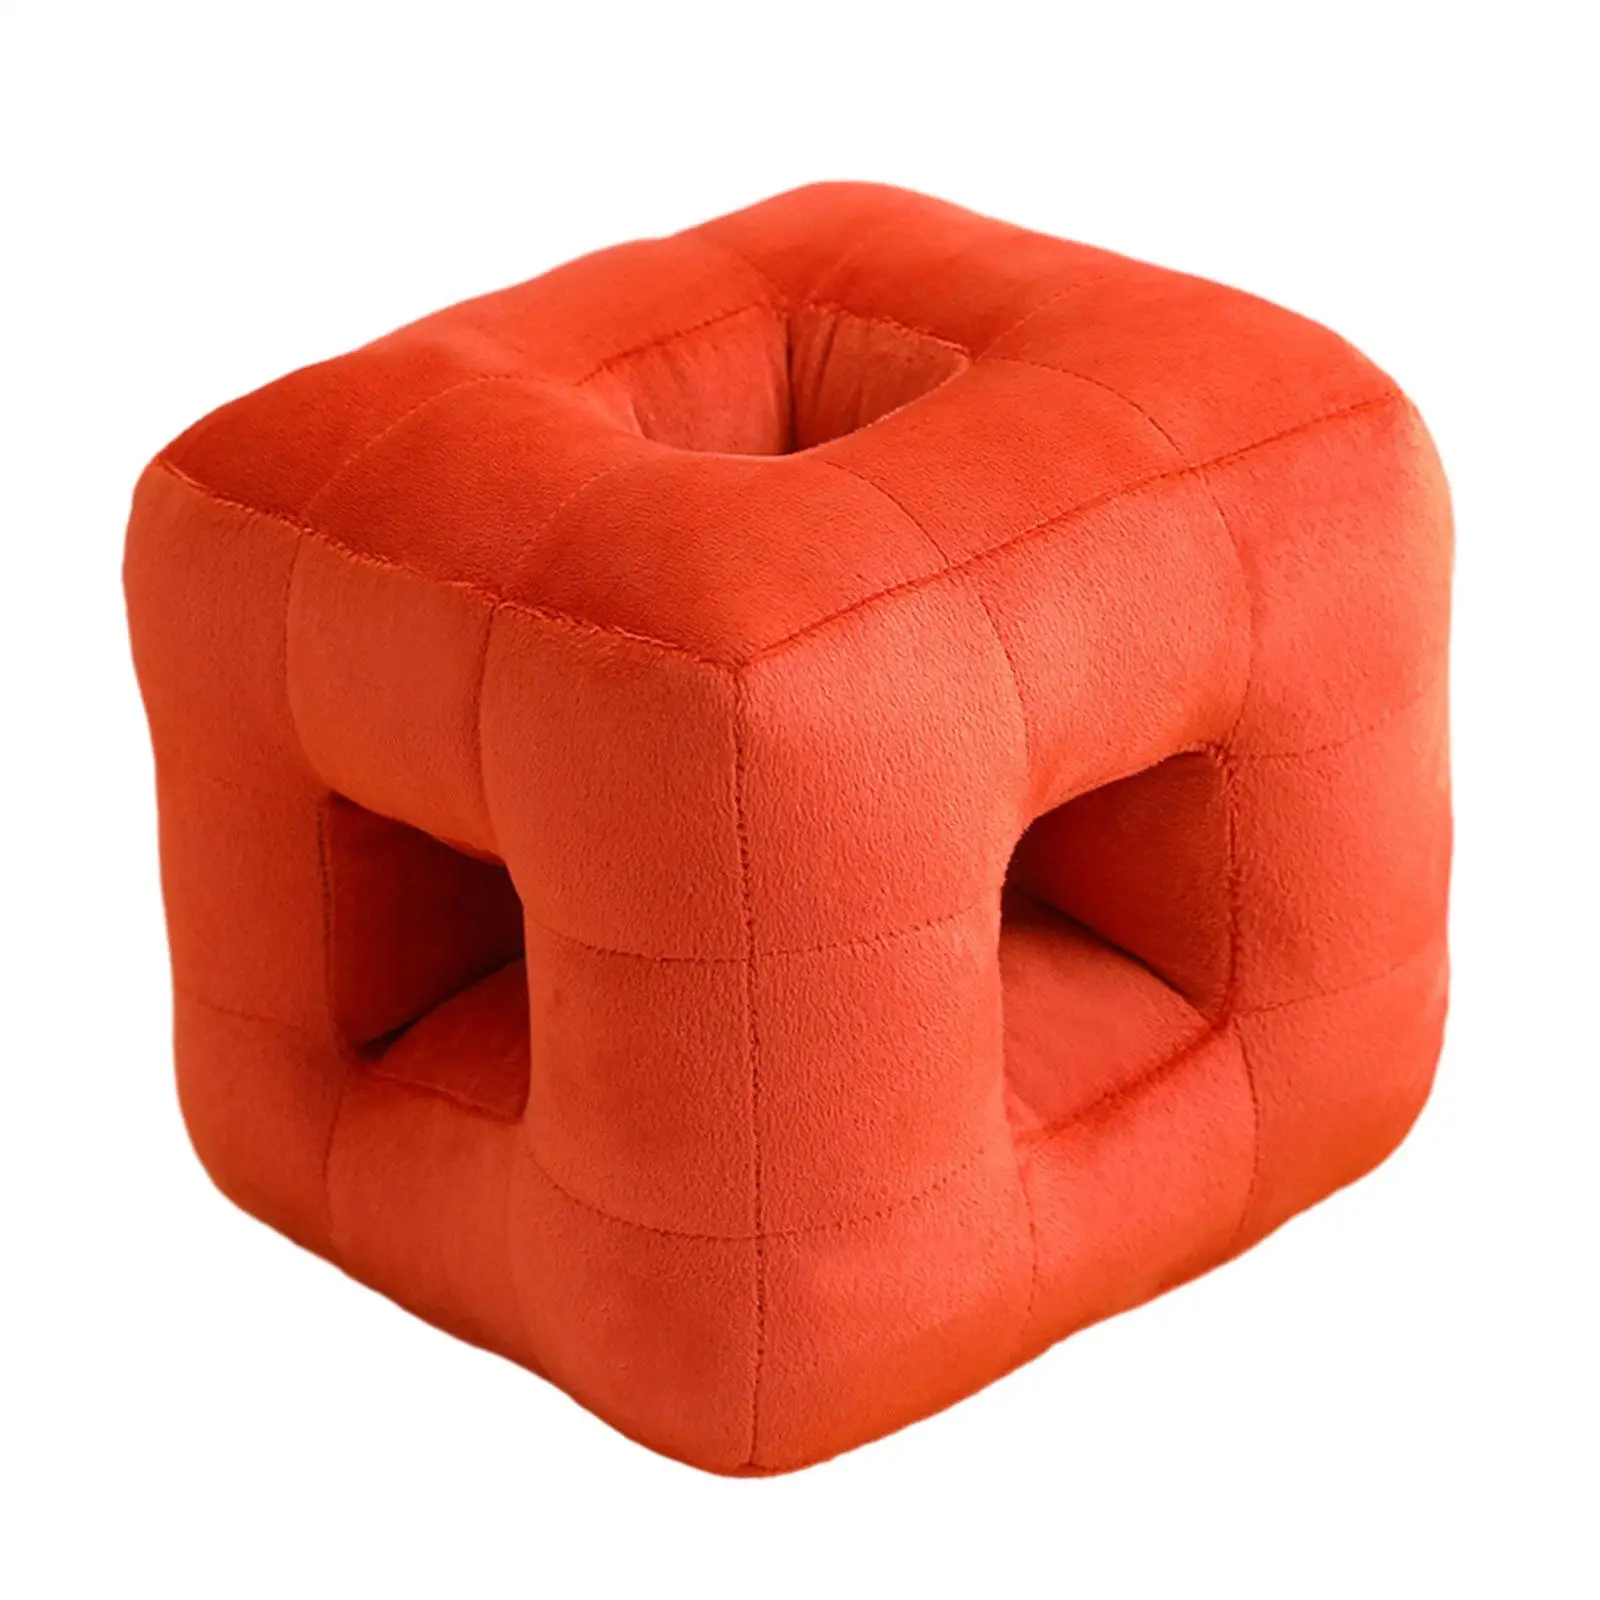 Nap Pillow Home Decoration Ergonomic Hollow Out Cube Sleeping Pillow for School Table Living Room Sleepy Nap Time Office Napping